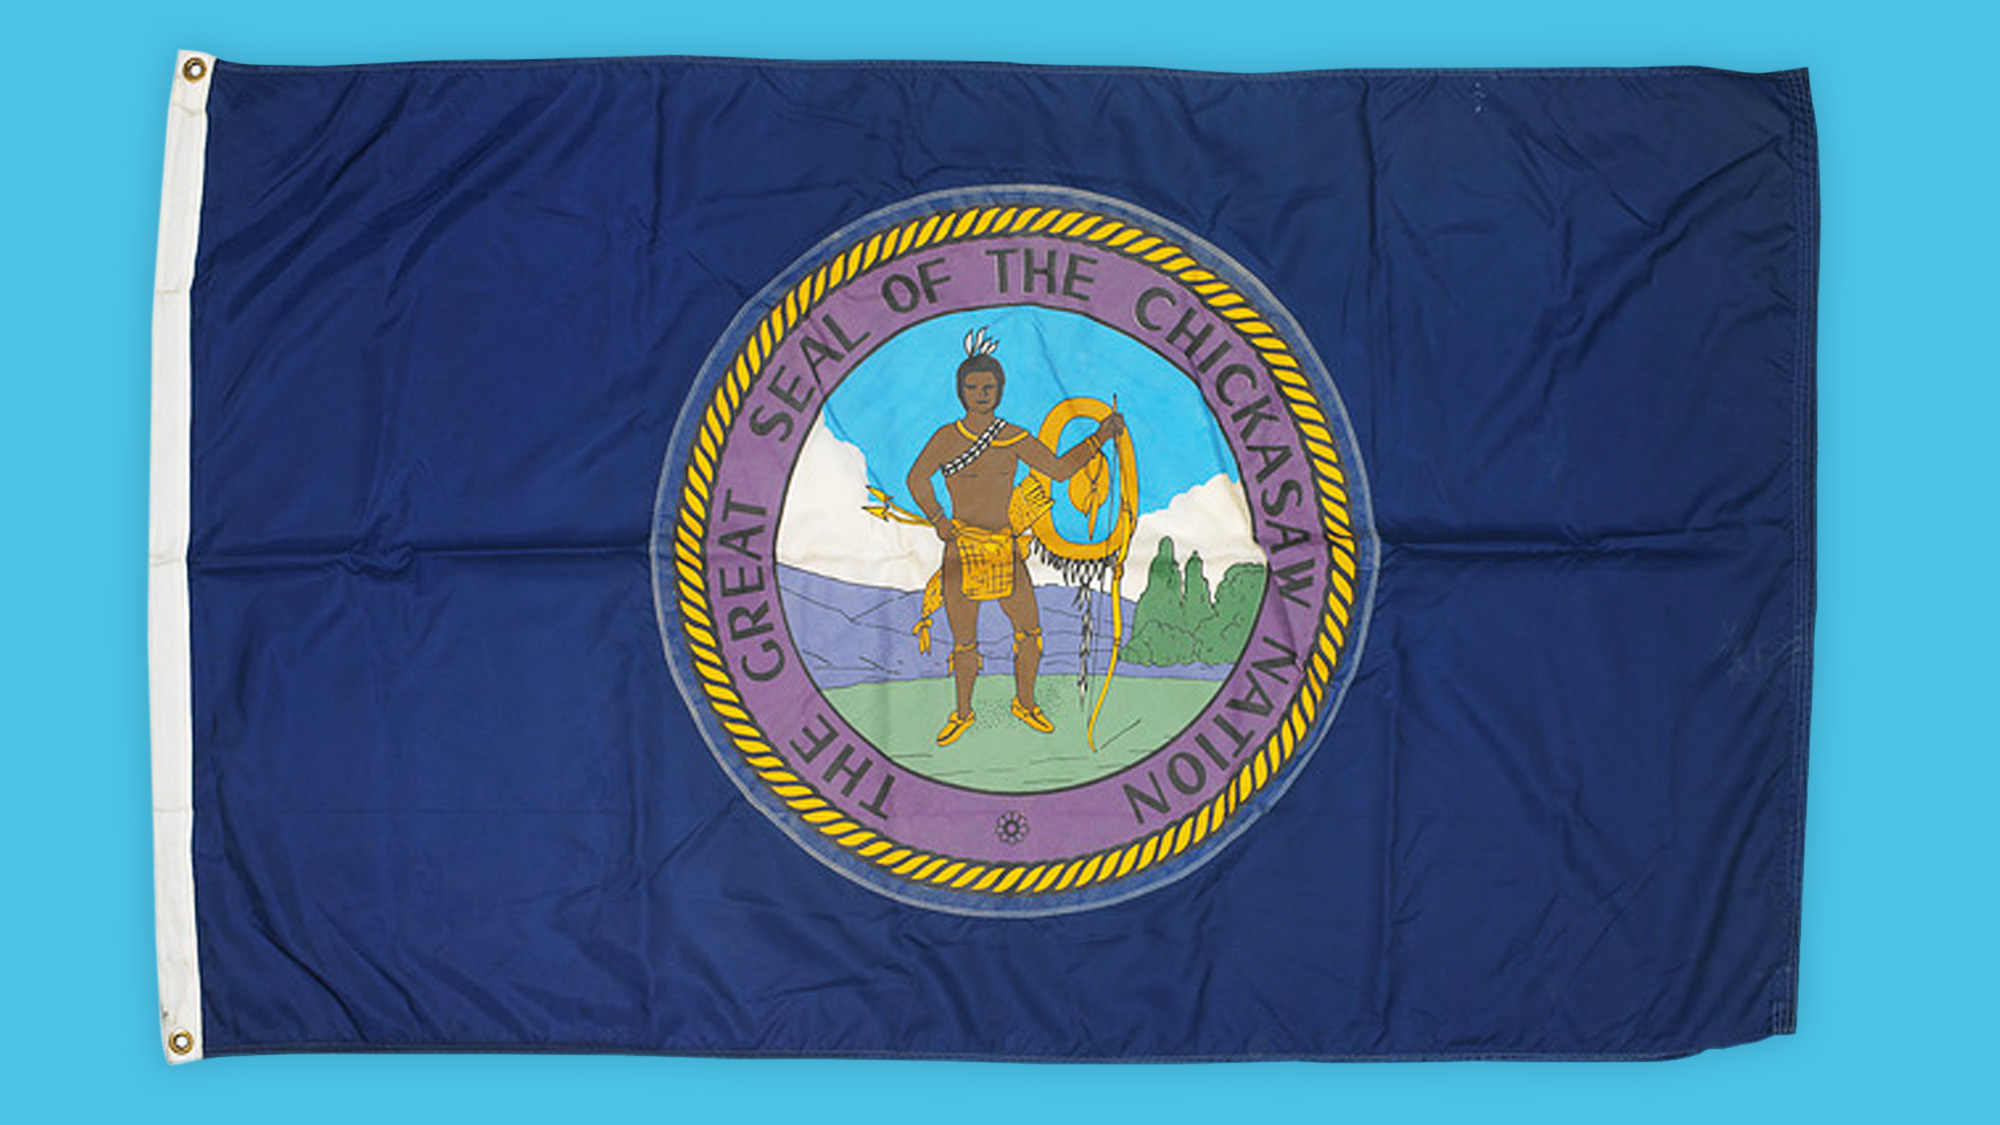 The flag of the Chickasaw Nation on a bright blue background